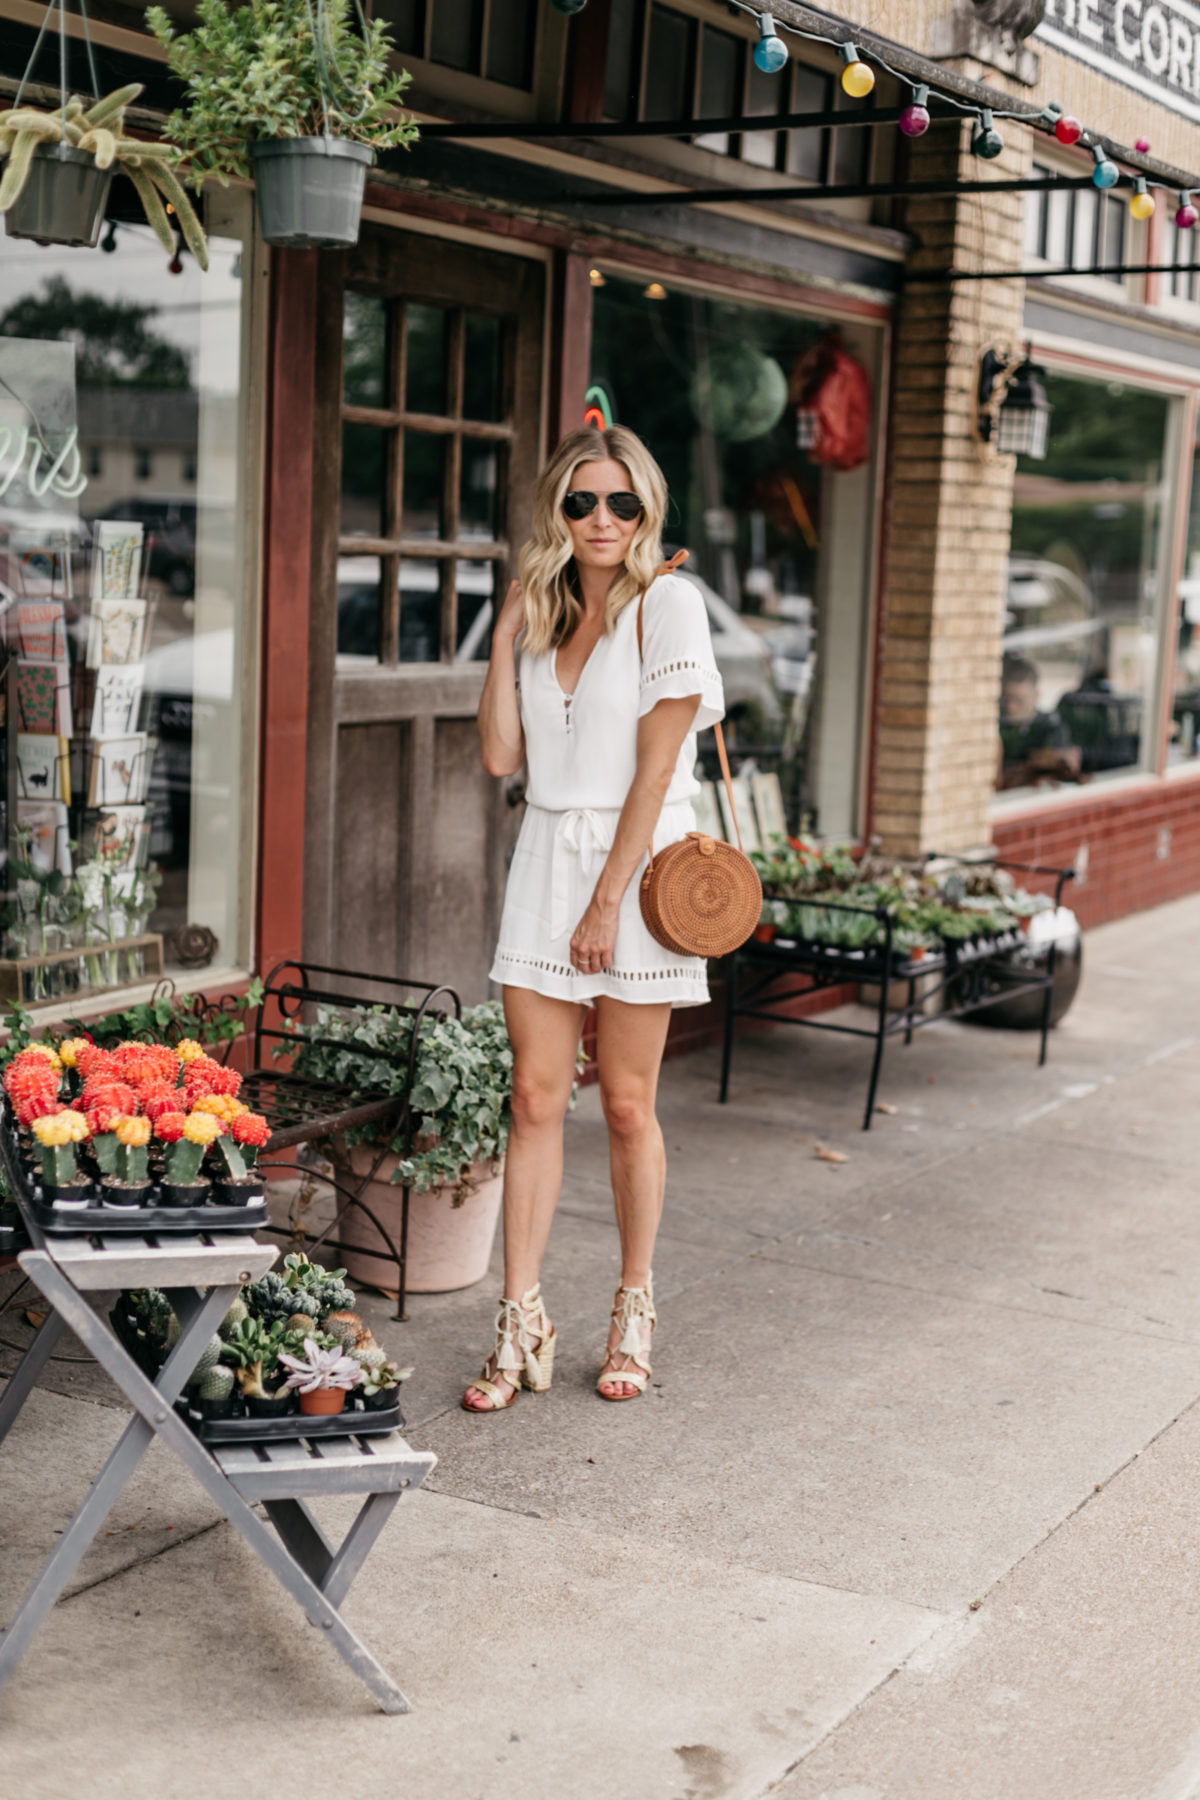 Brooke Burnett is wearing a white lace romper and woven circle bag